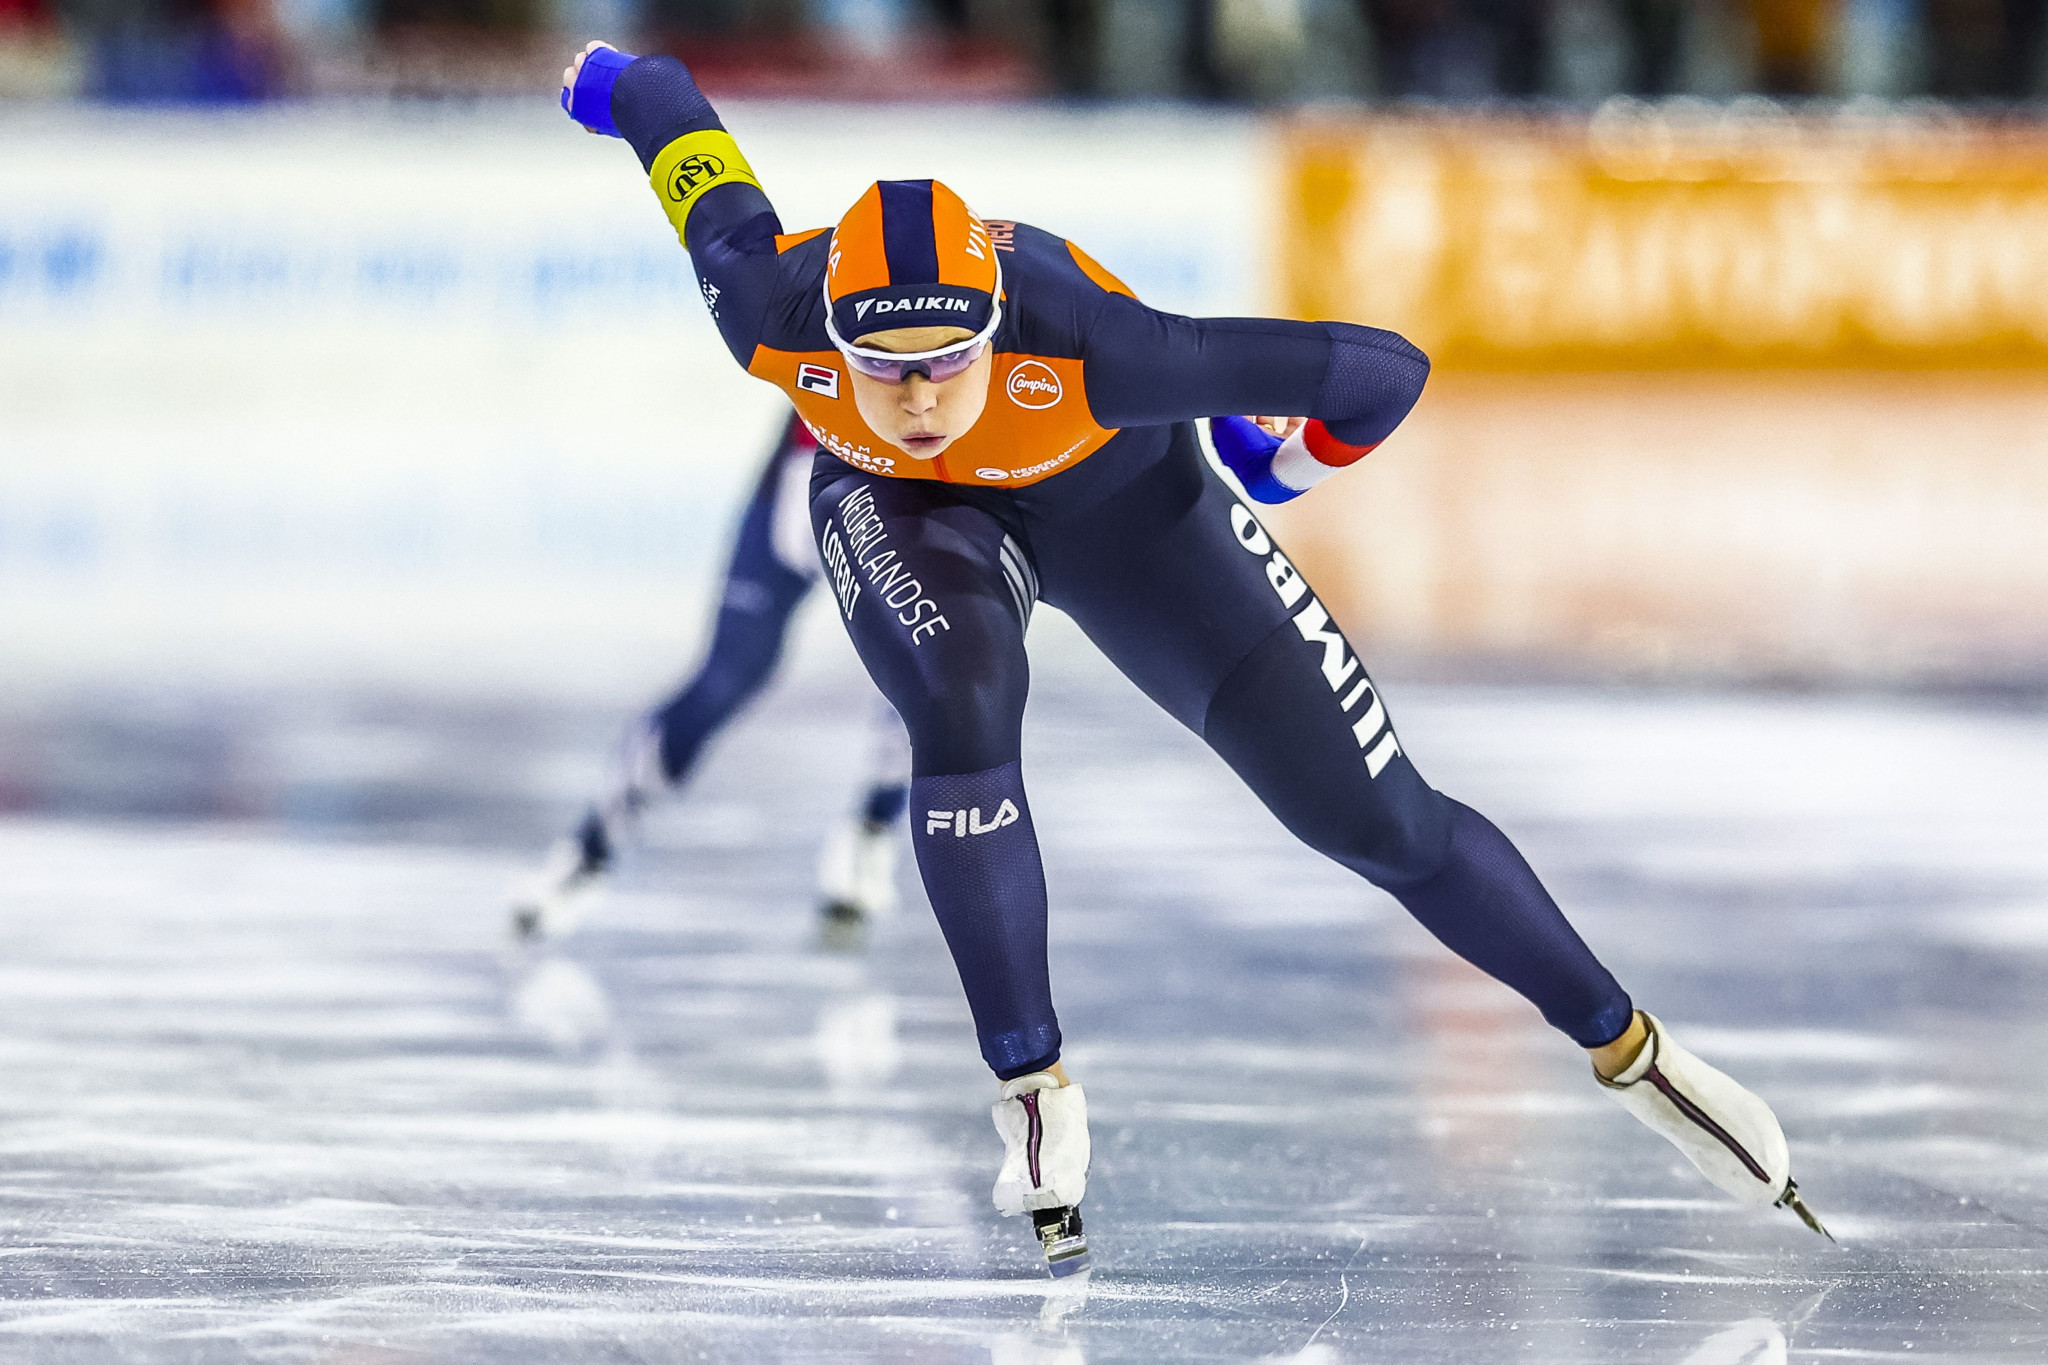 Netherlands dominate final day of ISU Speed Skating World Cup